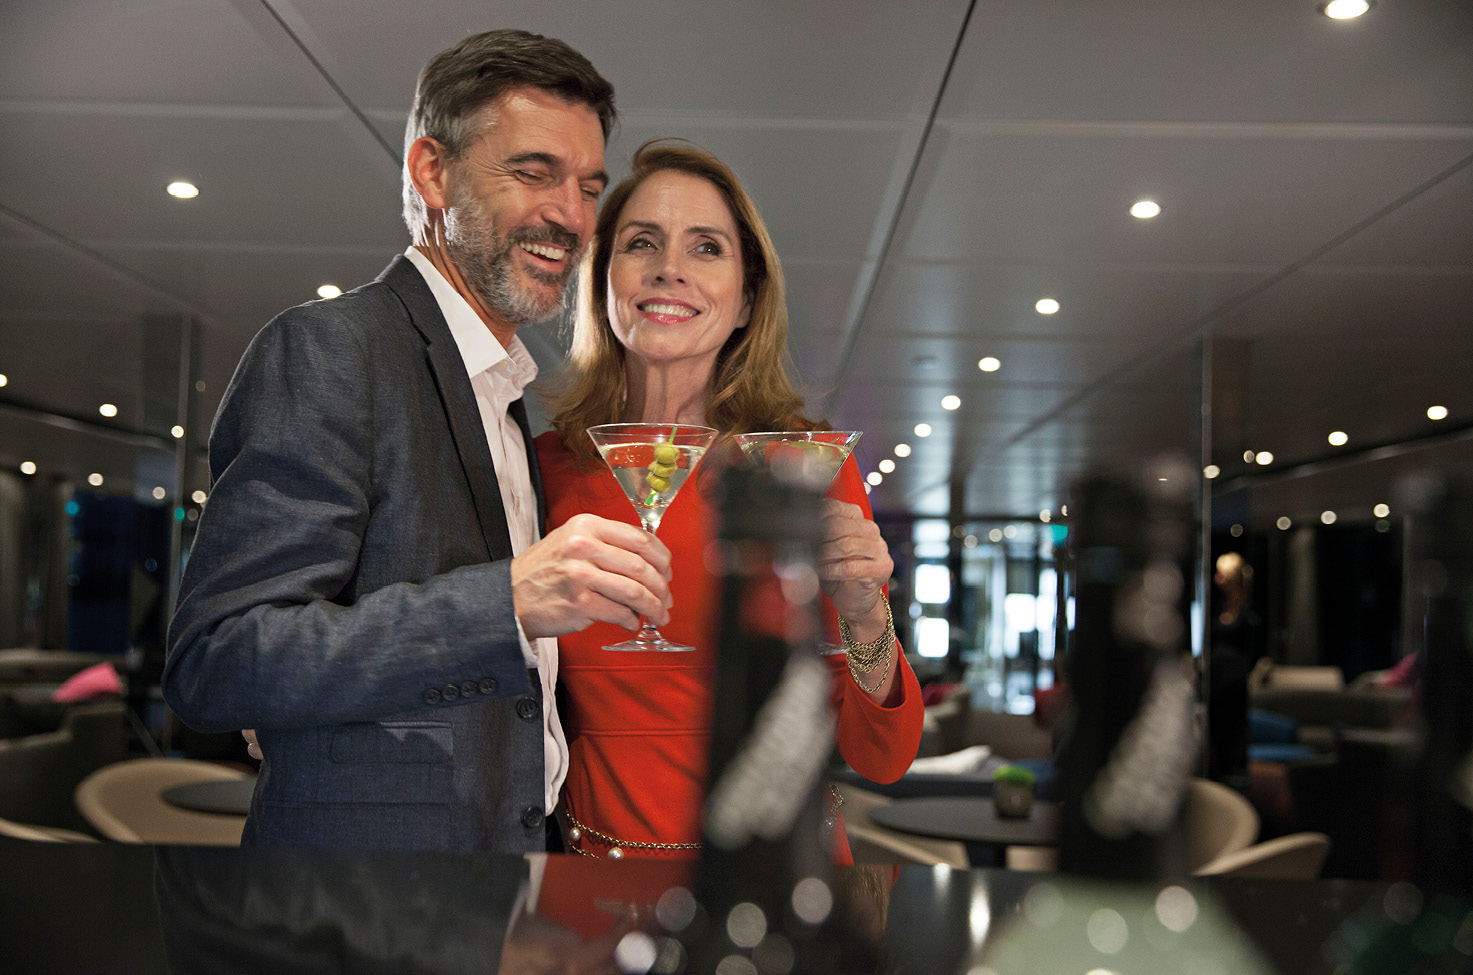 Smartly dressed man and woman smiling as they drink martini cocktails 